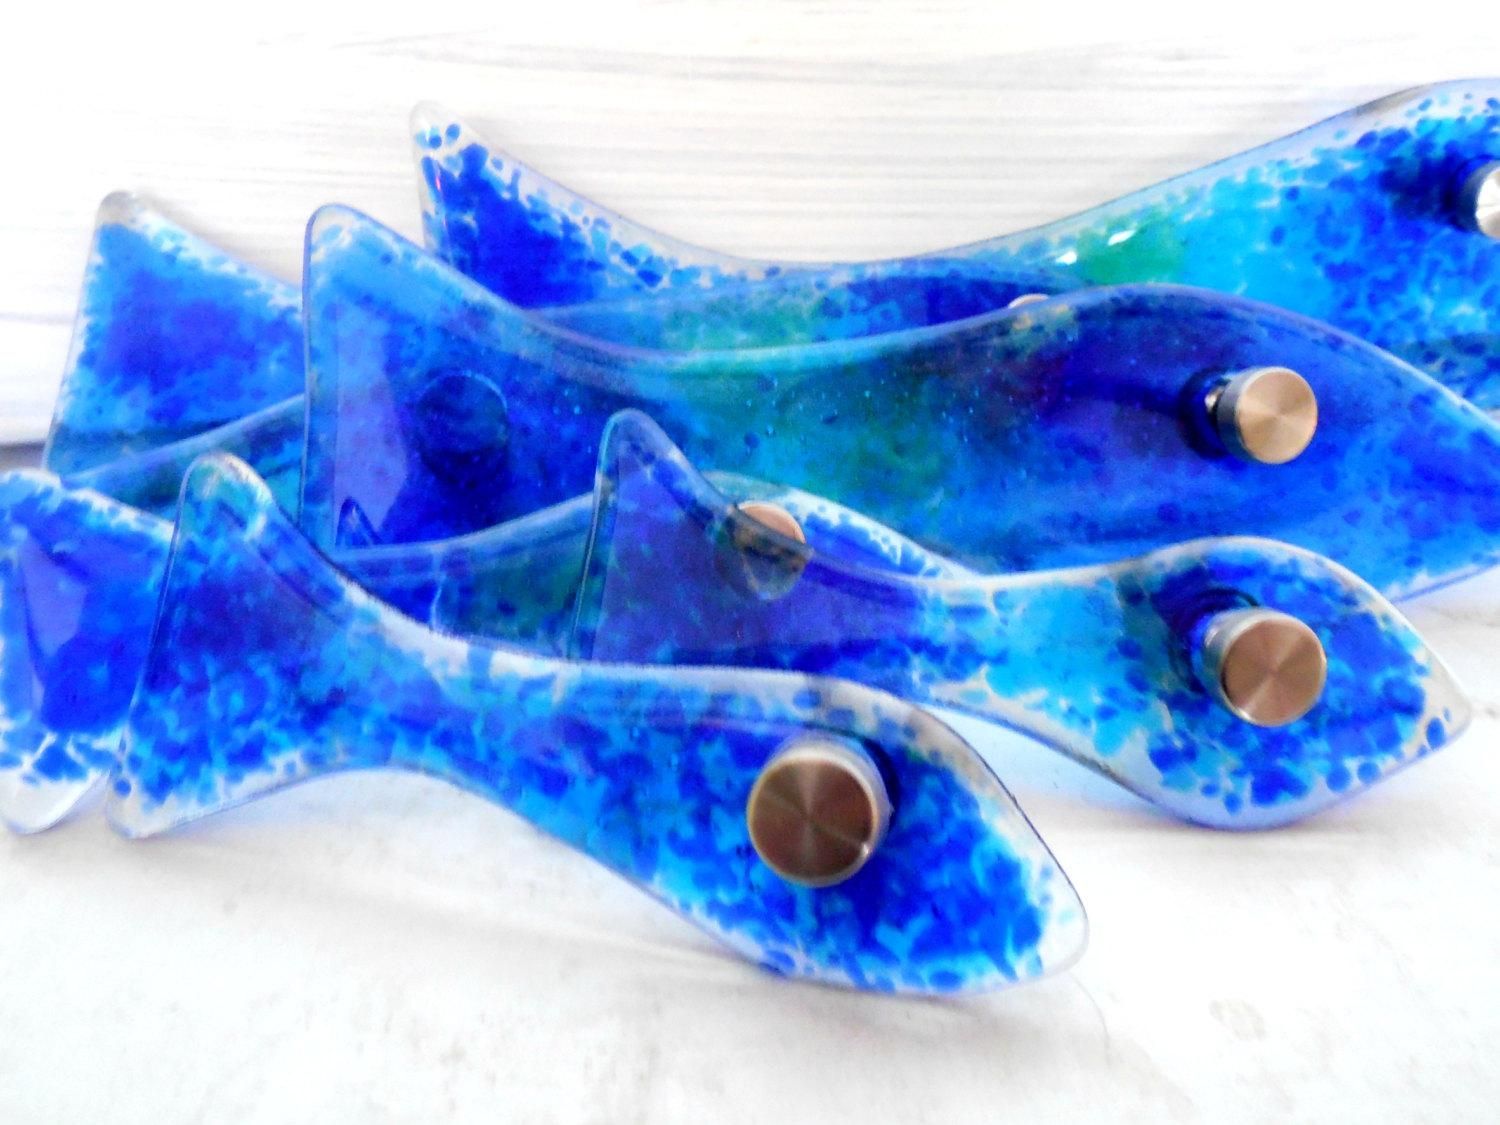 Glass Fish Wall Art | Home Design Ideas Within Fused Glass Fish Wall Art (View 13 of 20)